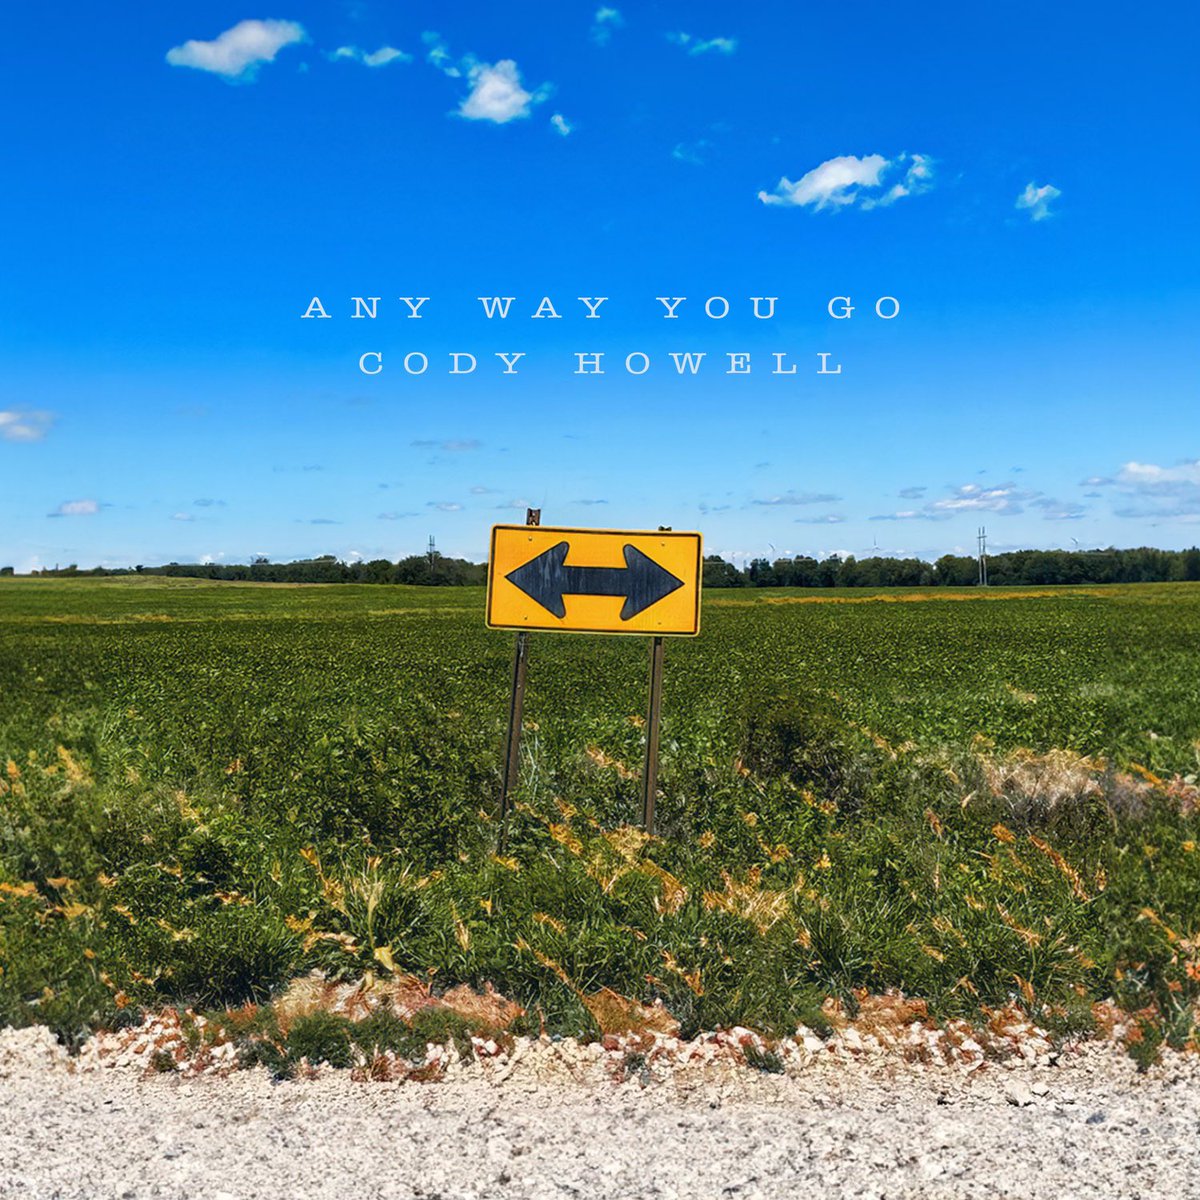 Check out “Any Way You Go” on all streaming platforms now!!!🔥🎶🤘🏼 #anywayyougo #howellyeah #weouthere #countrymusic #newmusic #country #redneck